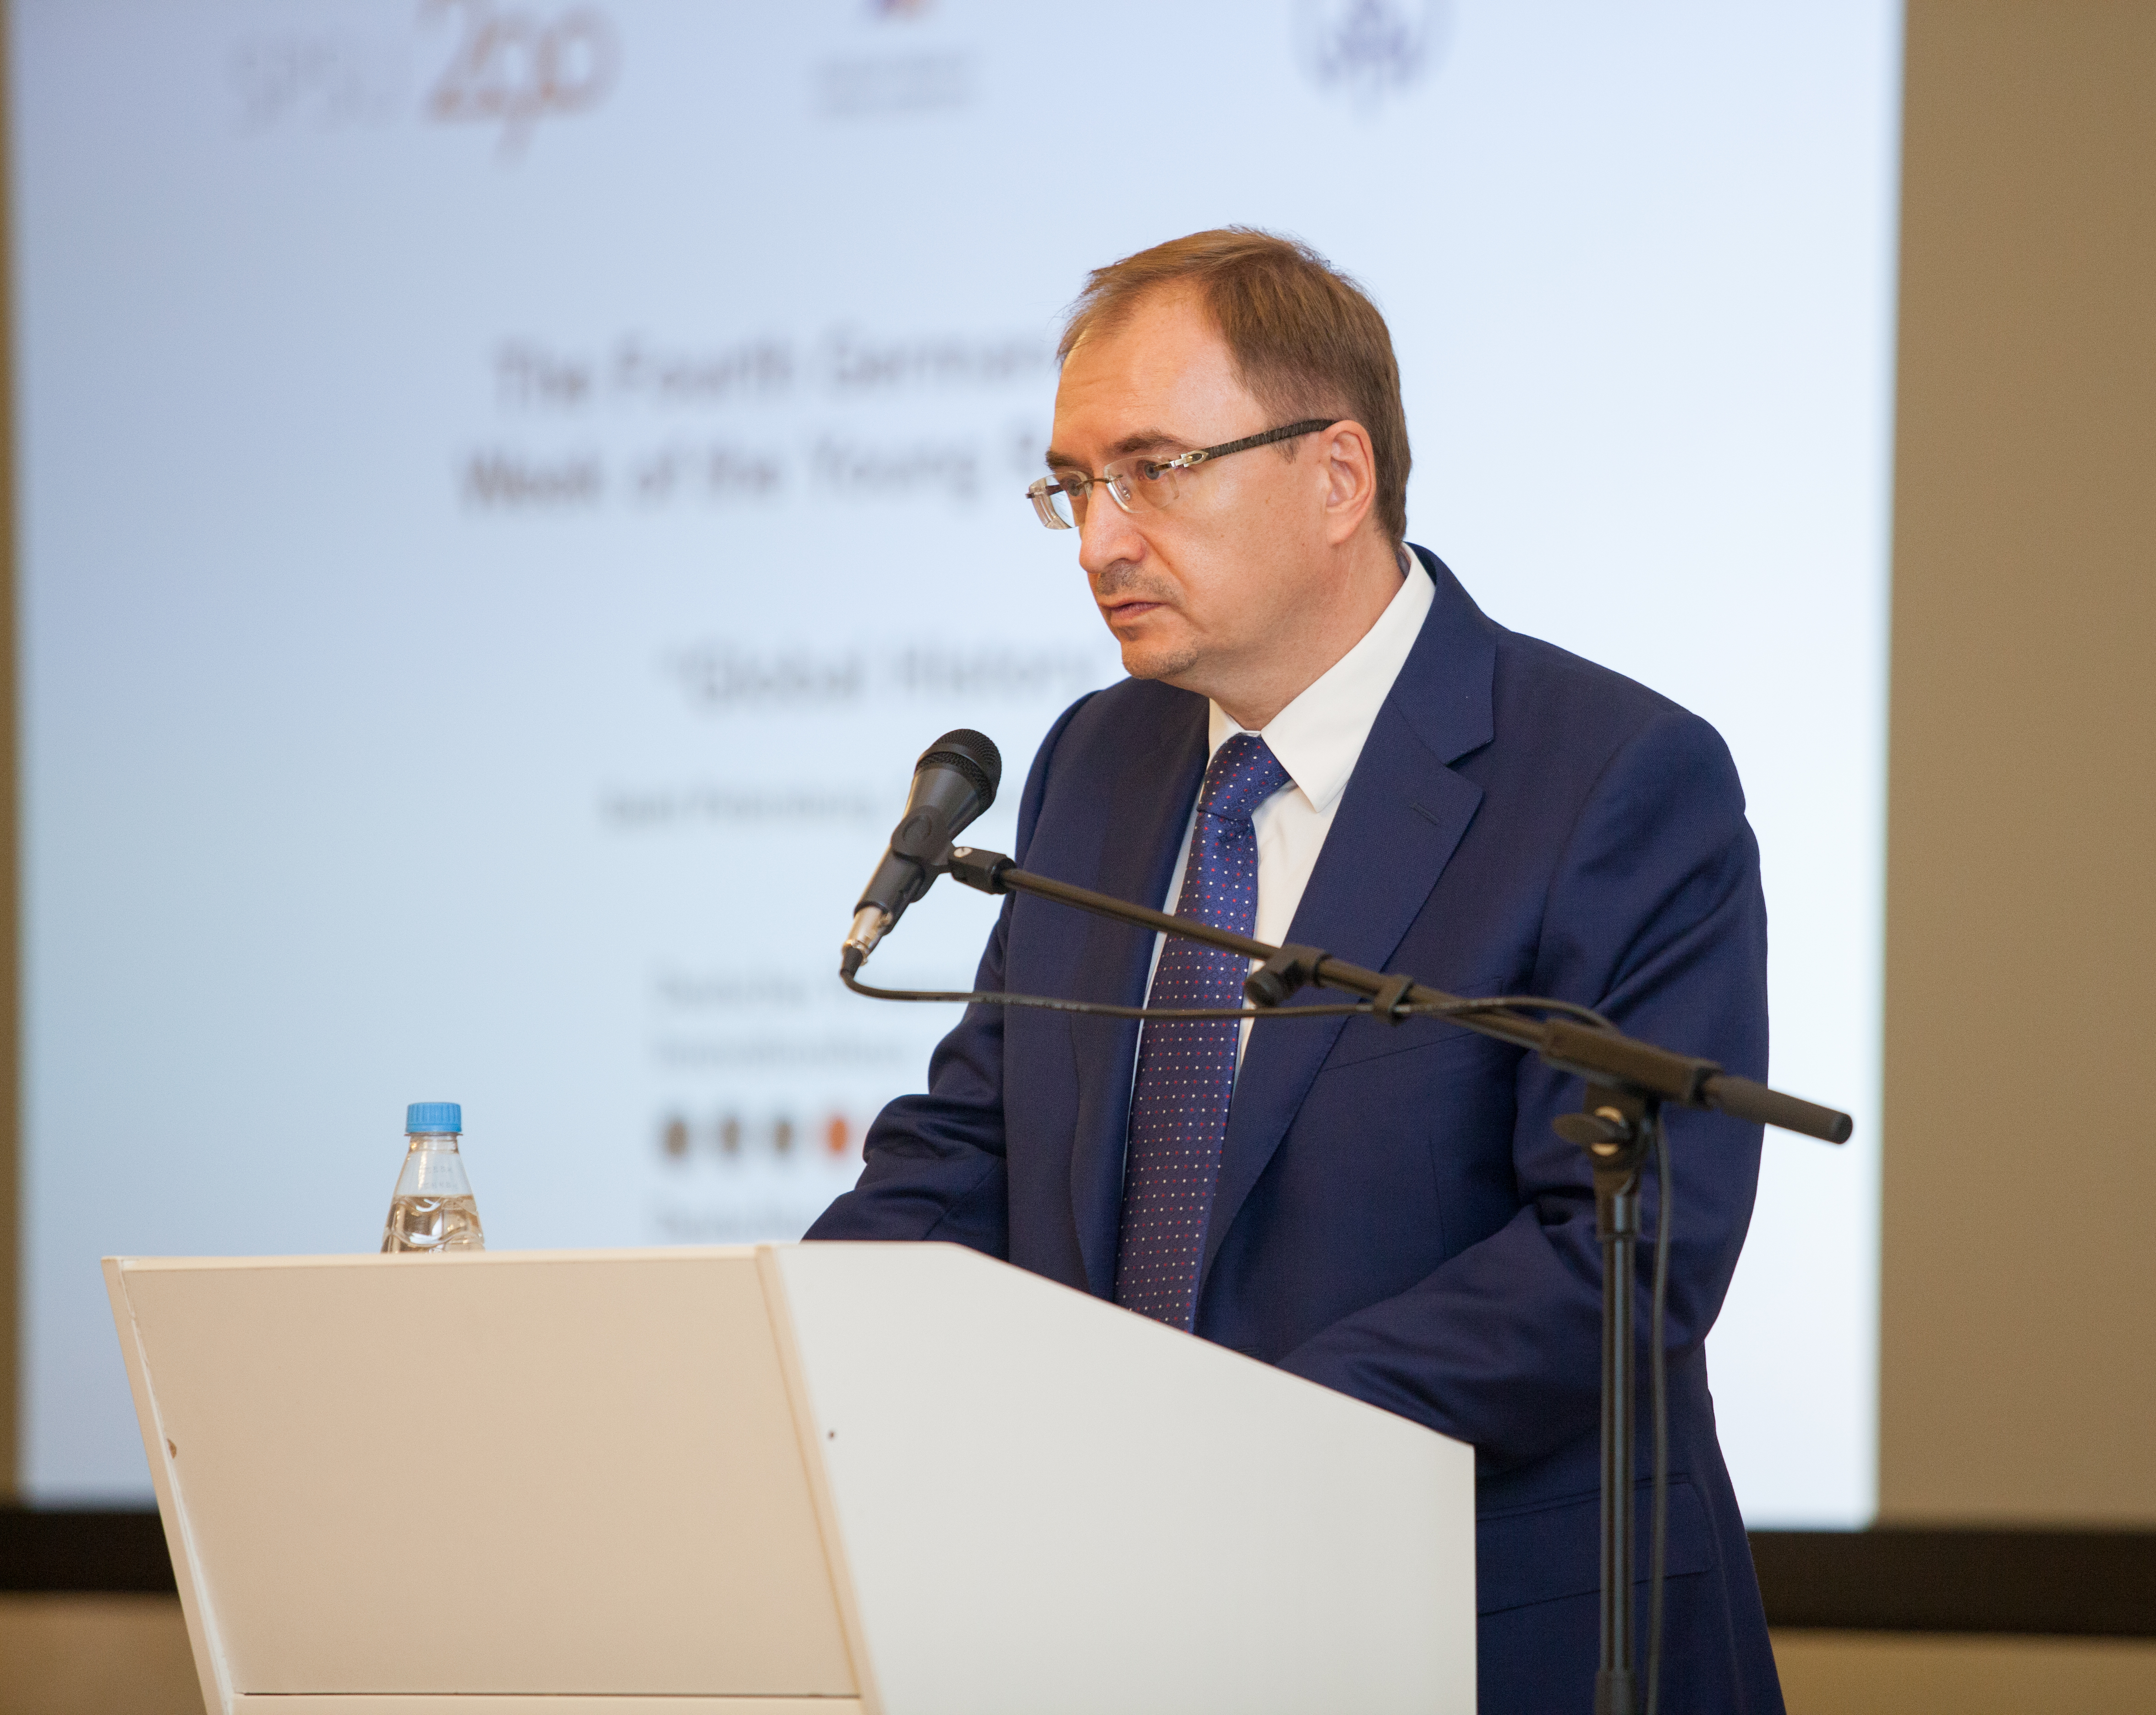 The Week of the Young Researcher was opened by Rector Kropachev (SPSU)